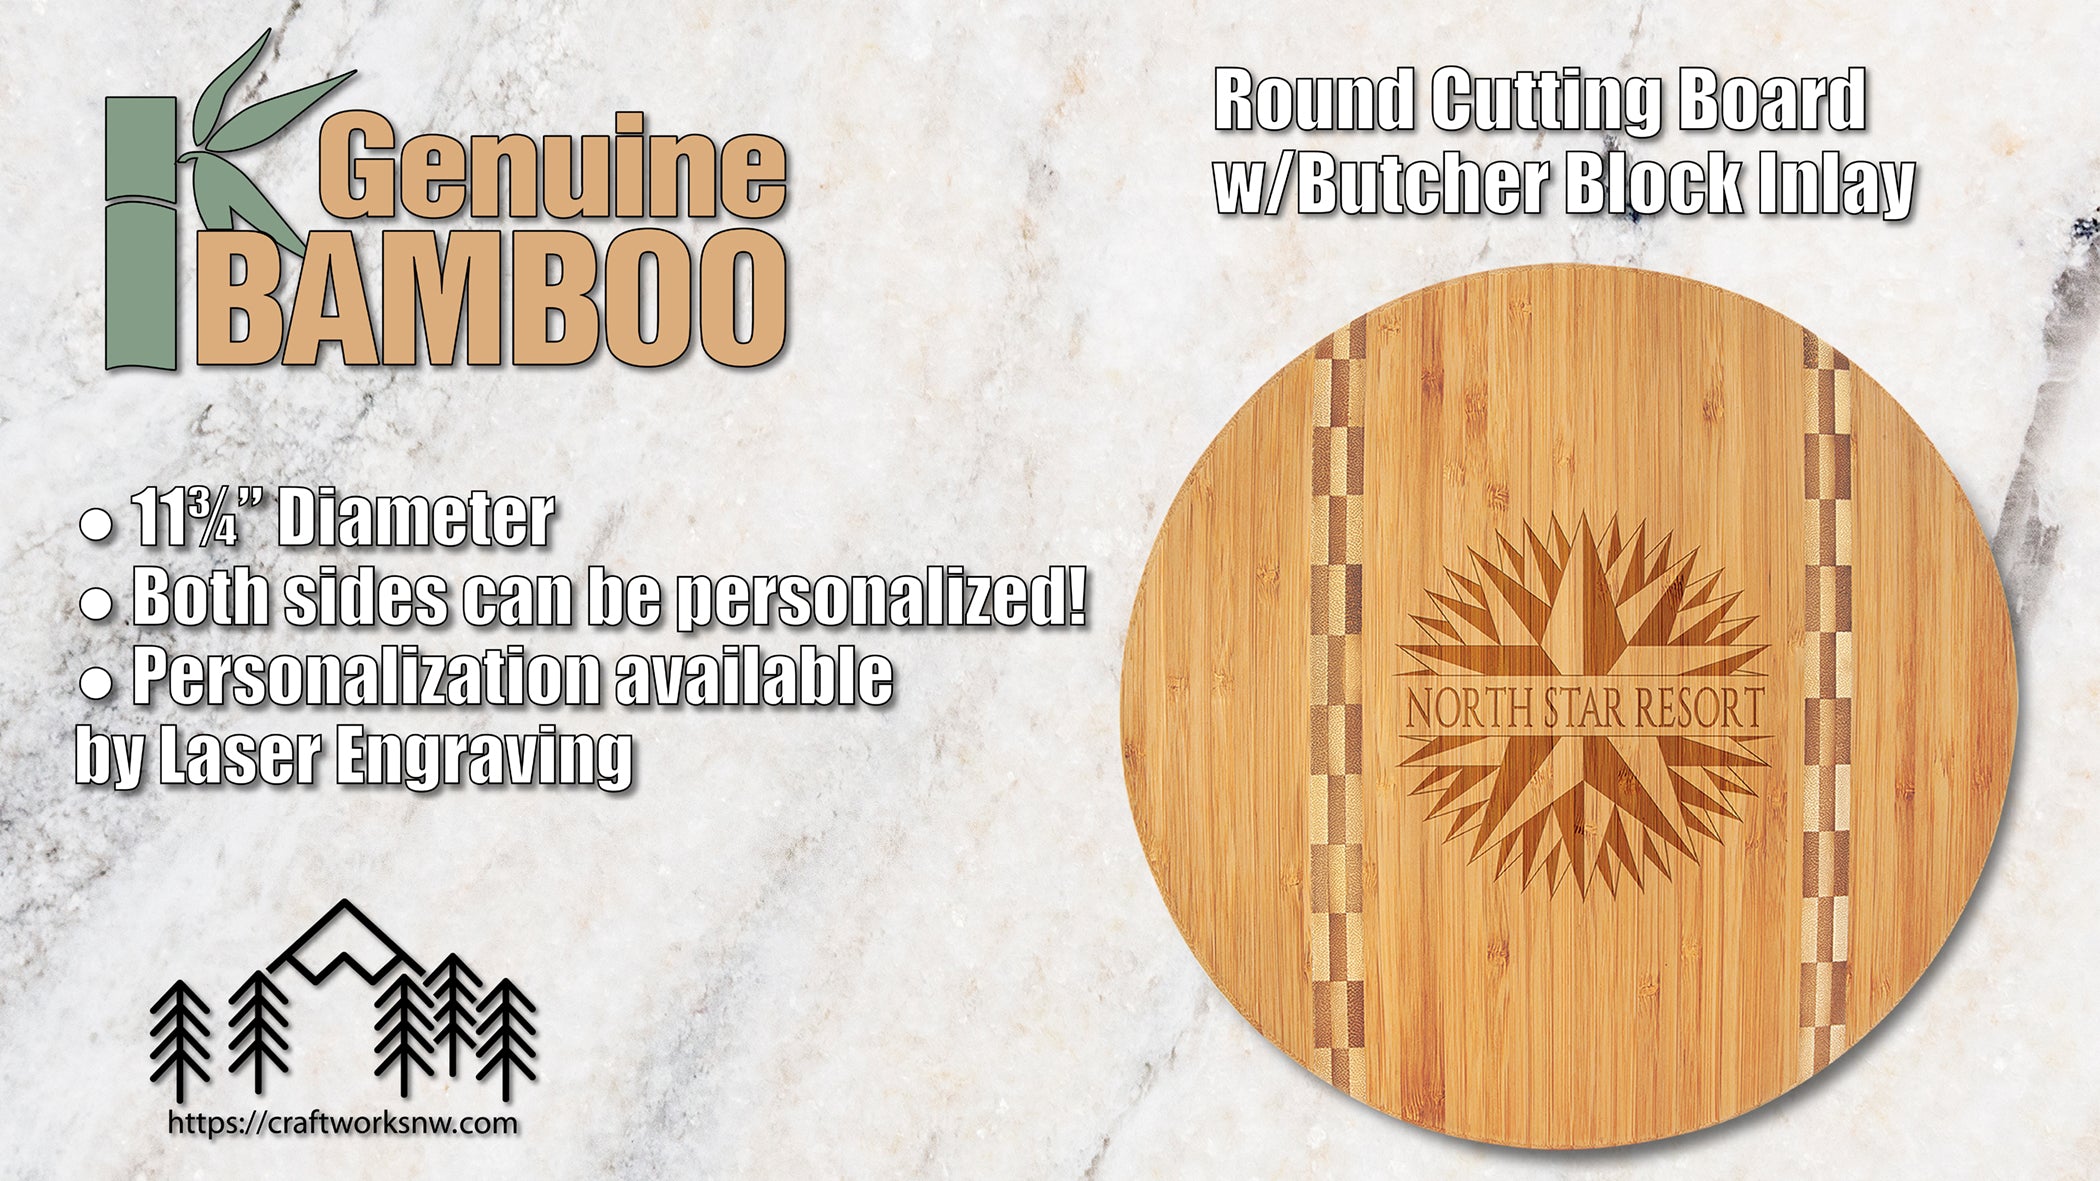 Round Cutting Board w/Butcher Block Inlay, Bamboo, 11 3/4", Laser Engraved - Craftworks NW, LLC